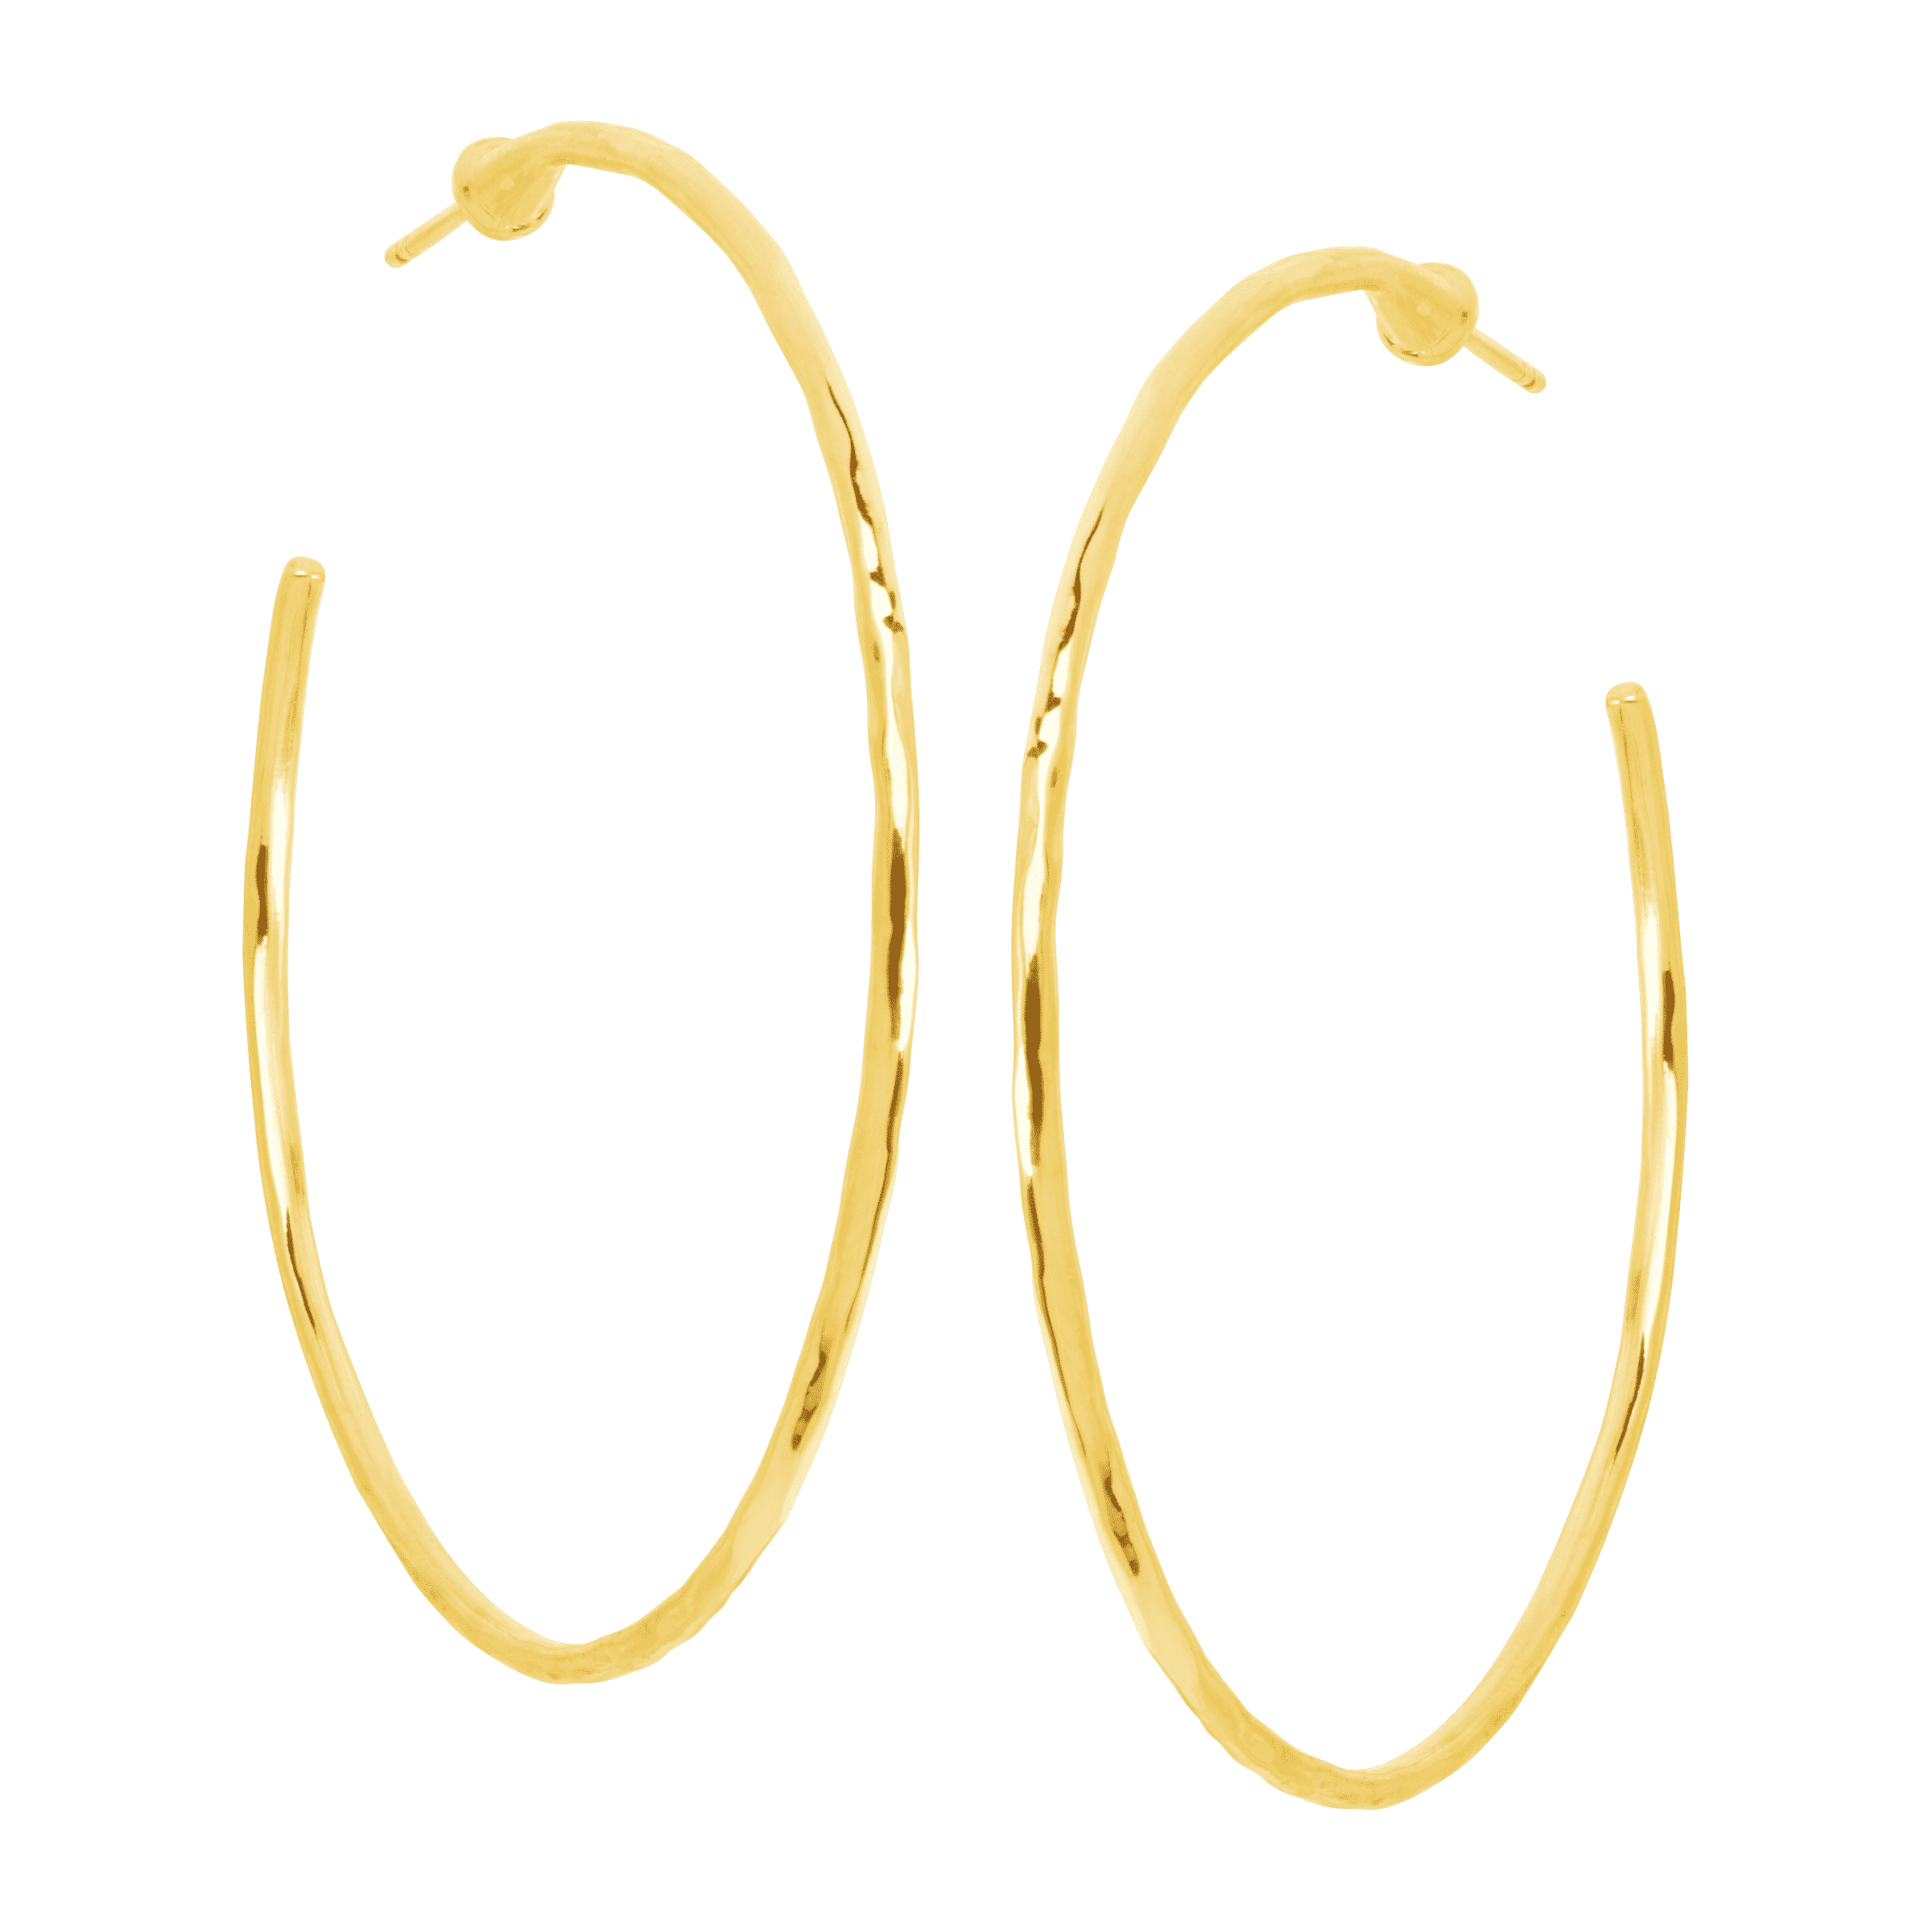 ON SALE! Hoop Earrings Design 2 14k Solid Yellow Gold NOW ONLY $45 